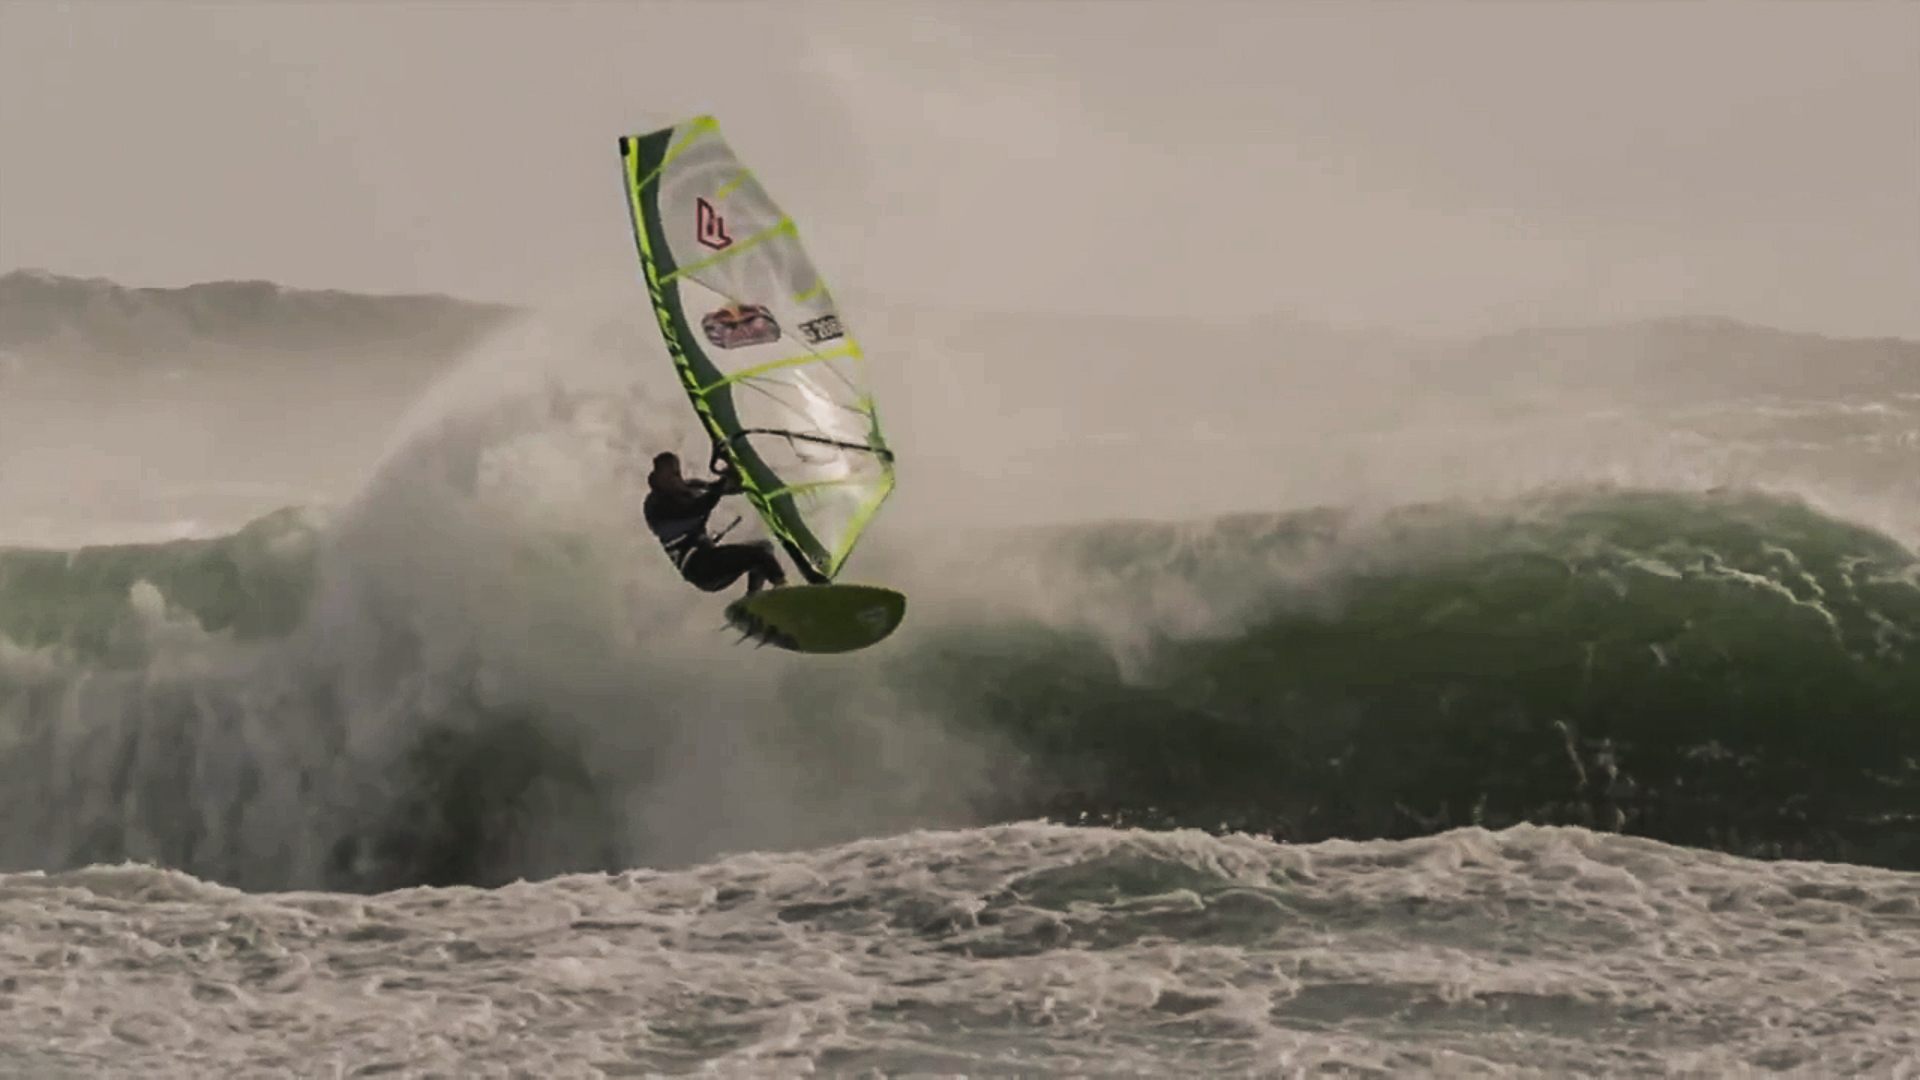 Windsurfing_in_Tasmania_-_Mission_2_-_Red_Bull_Storm_Chase_2013_02.jpg